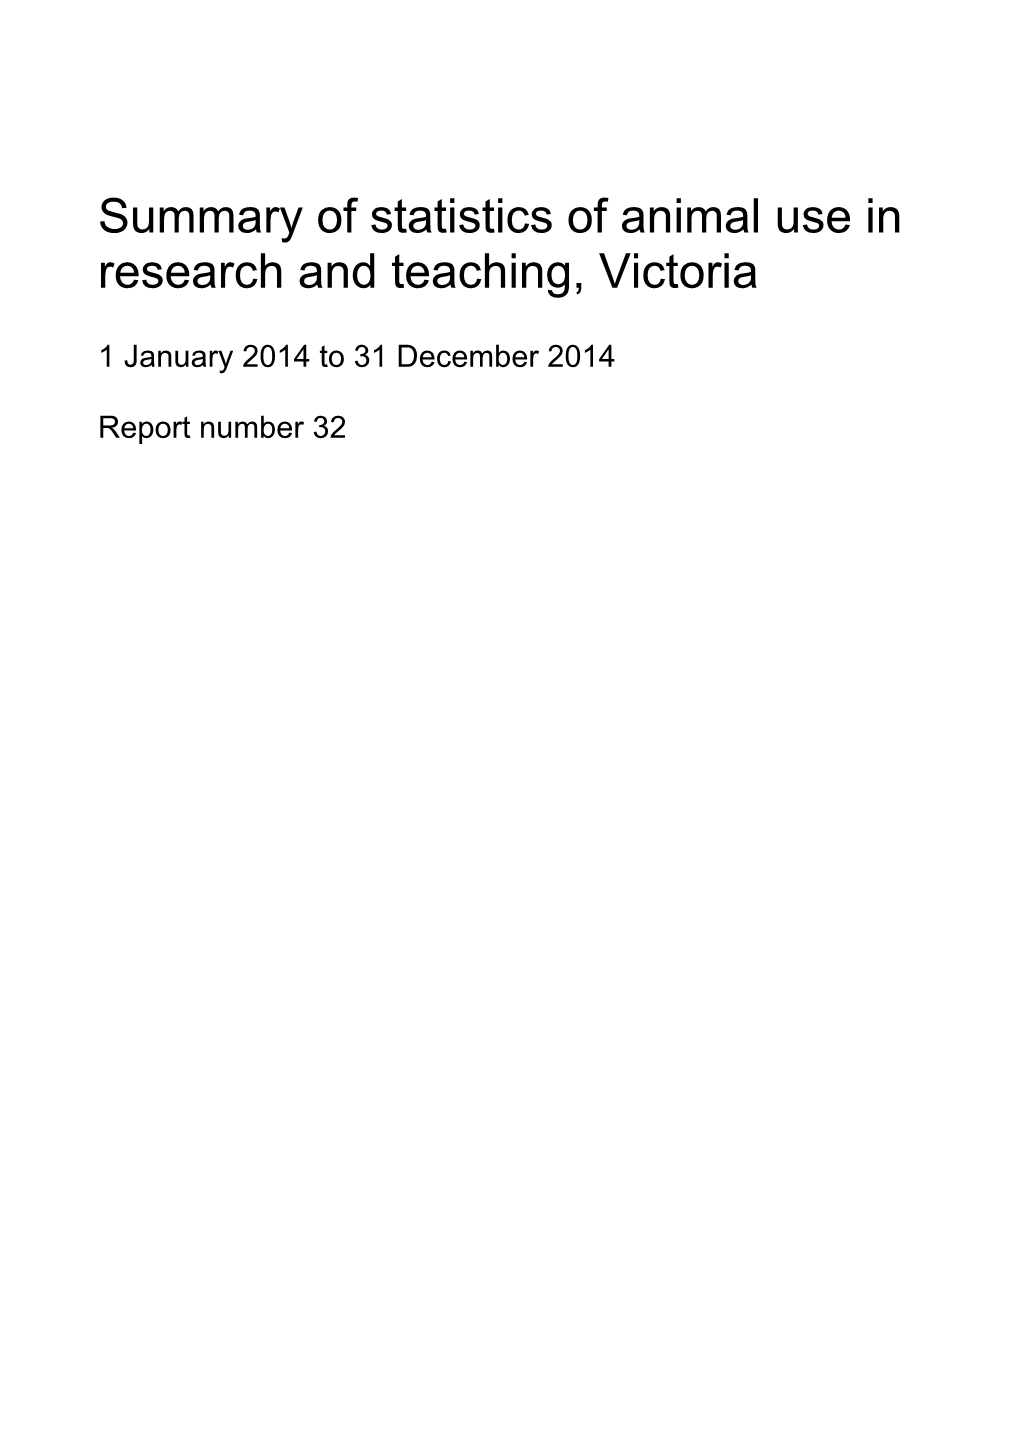 Summary of Statistics of Animal Use in Research and Teaching, Victoria